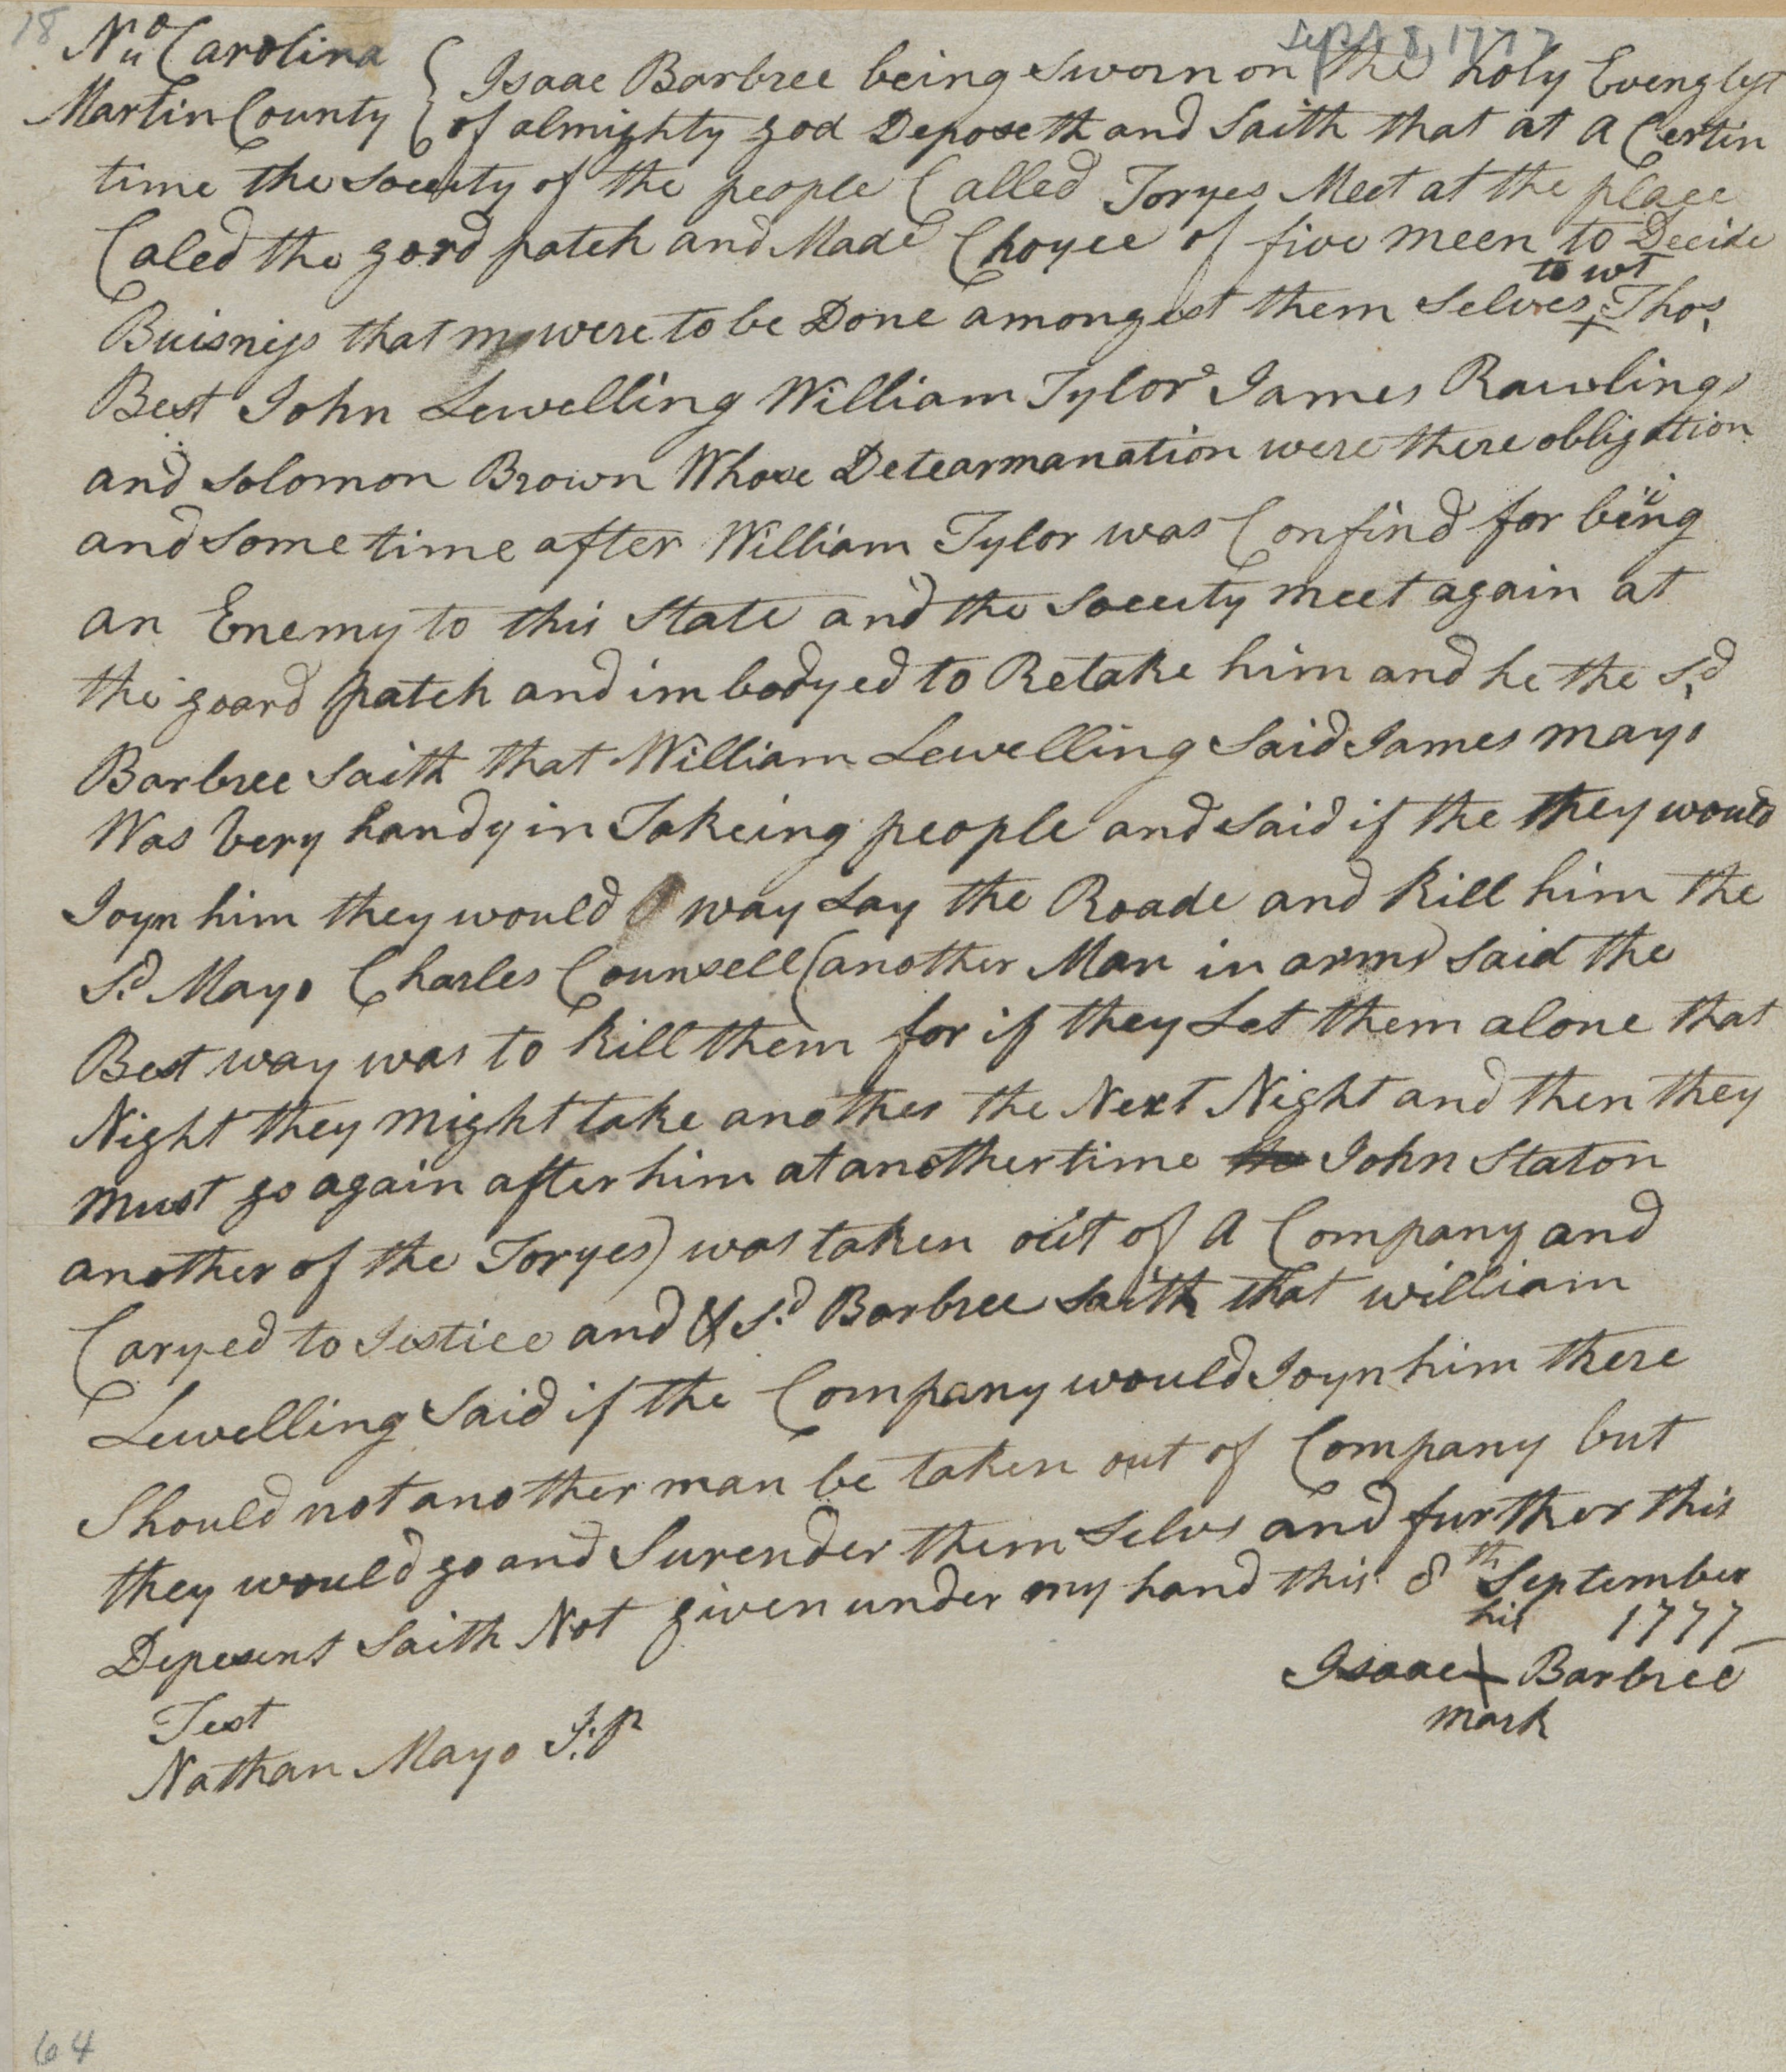 Deposition of Isaac Barbree, 8 September 1777, page 1